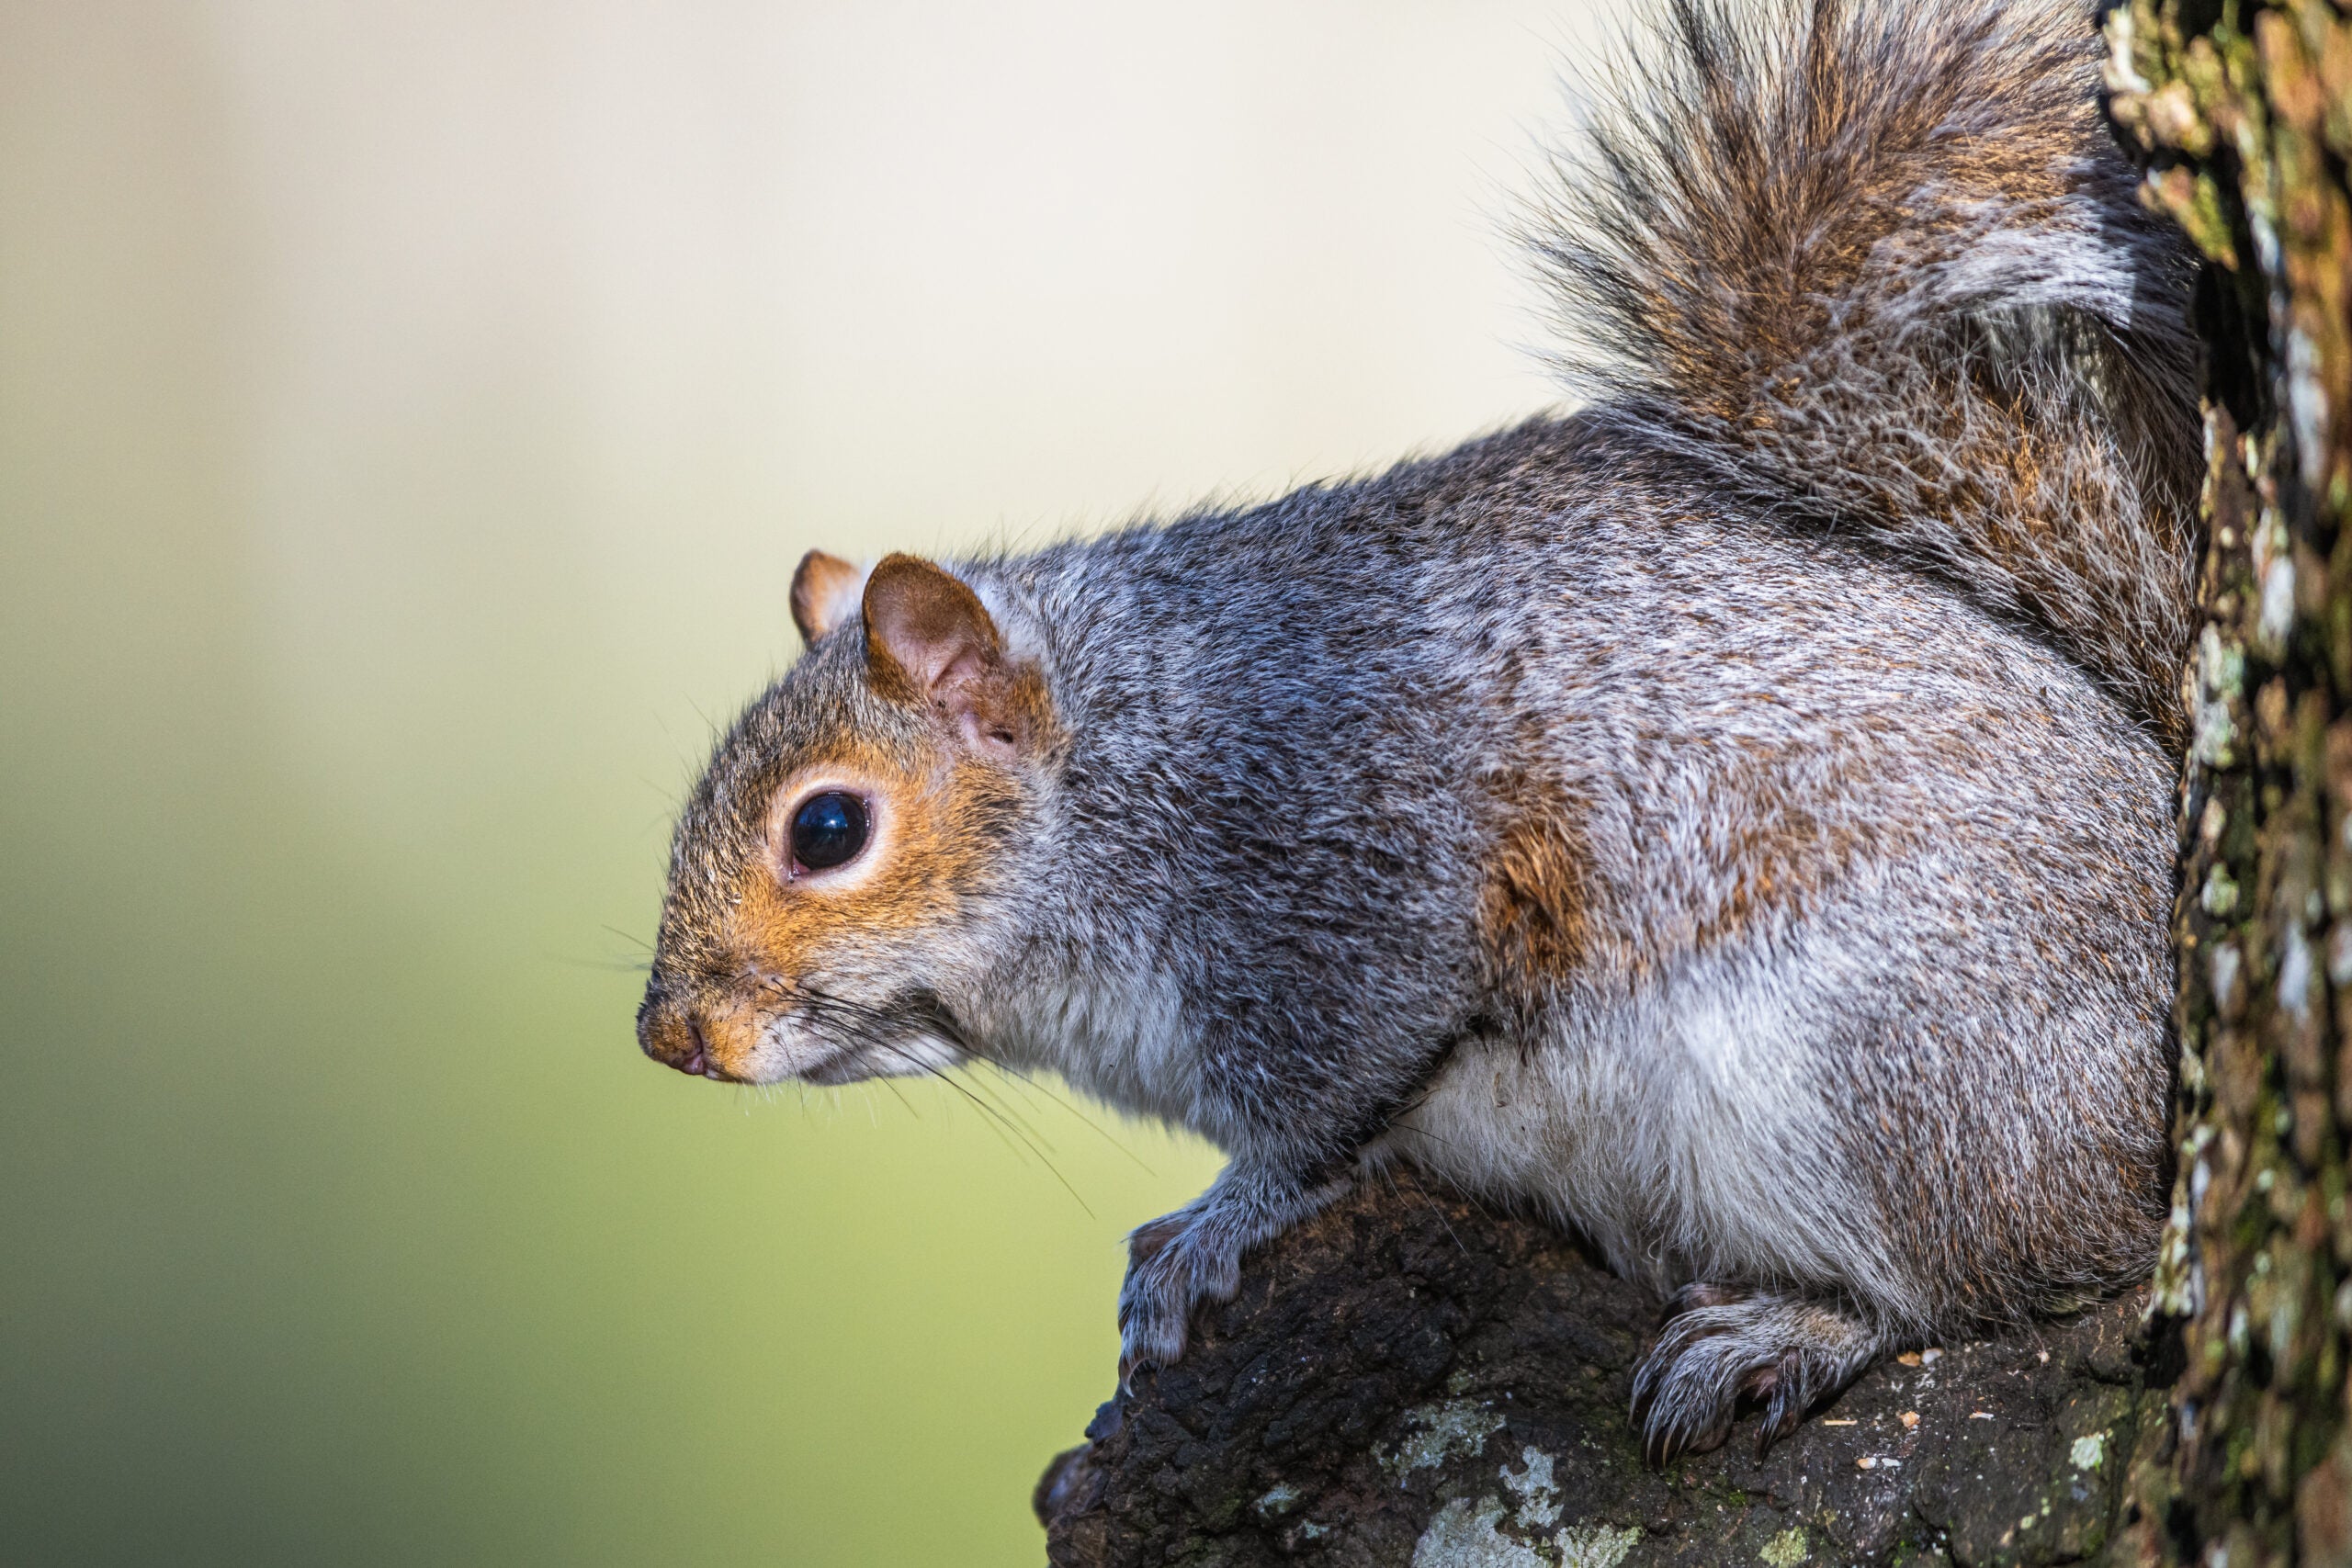 A gray squirrel perched in a tree with sky in the background.